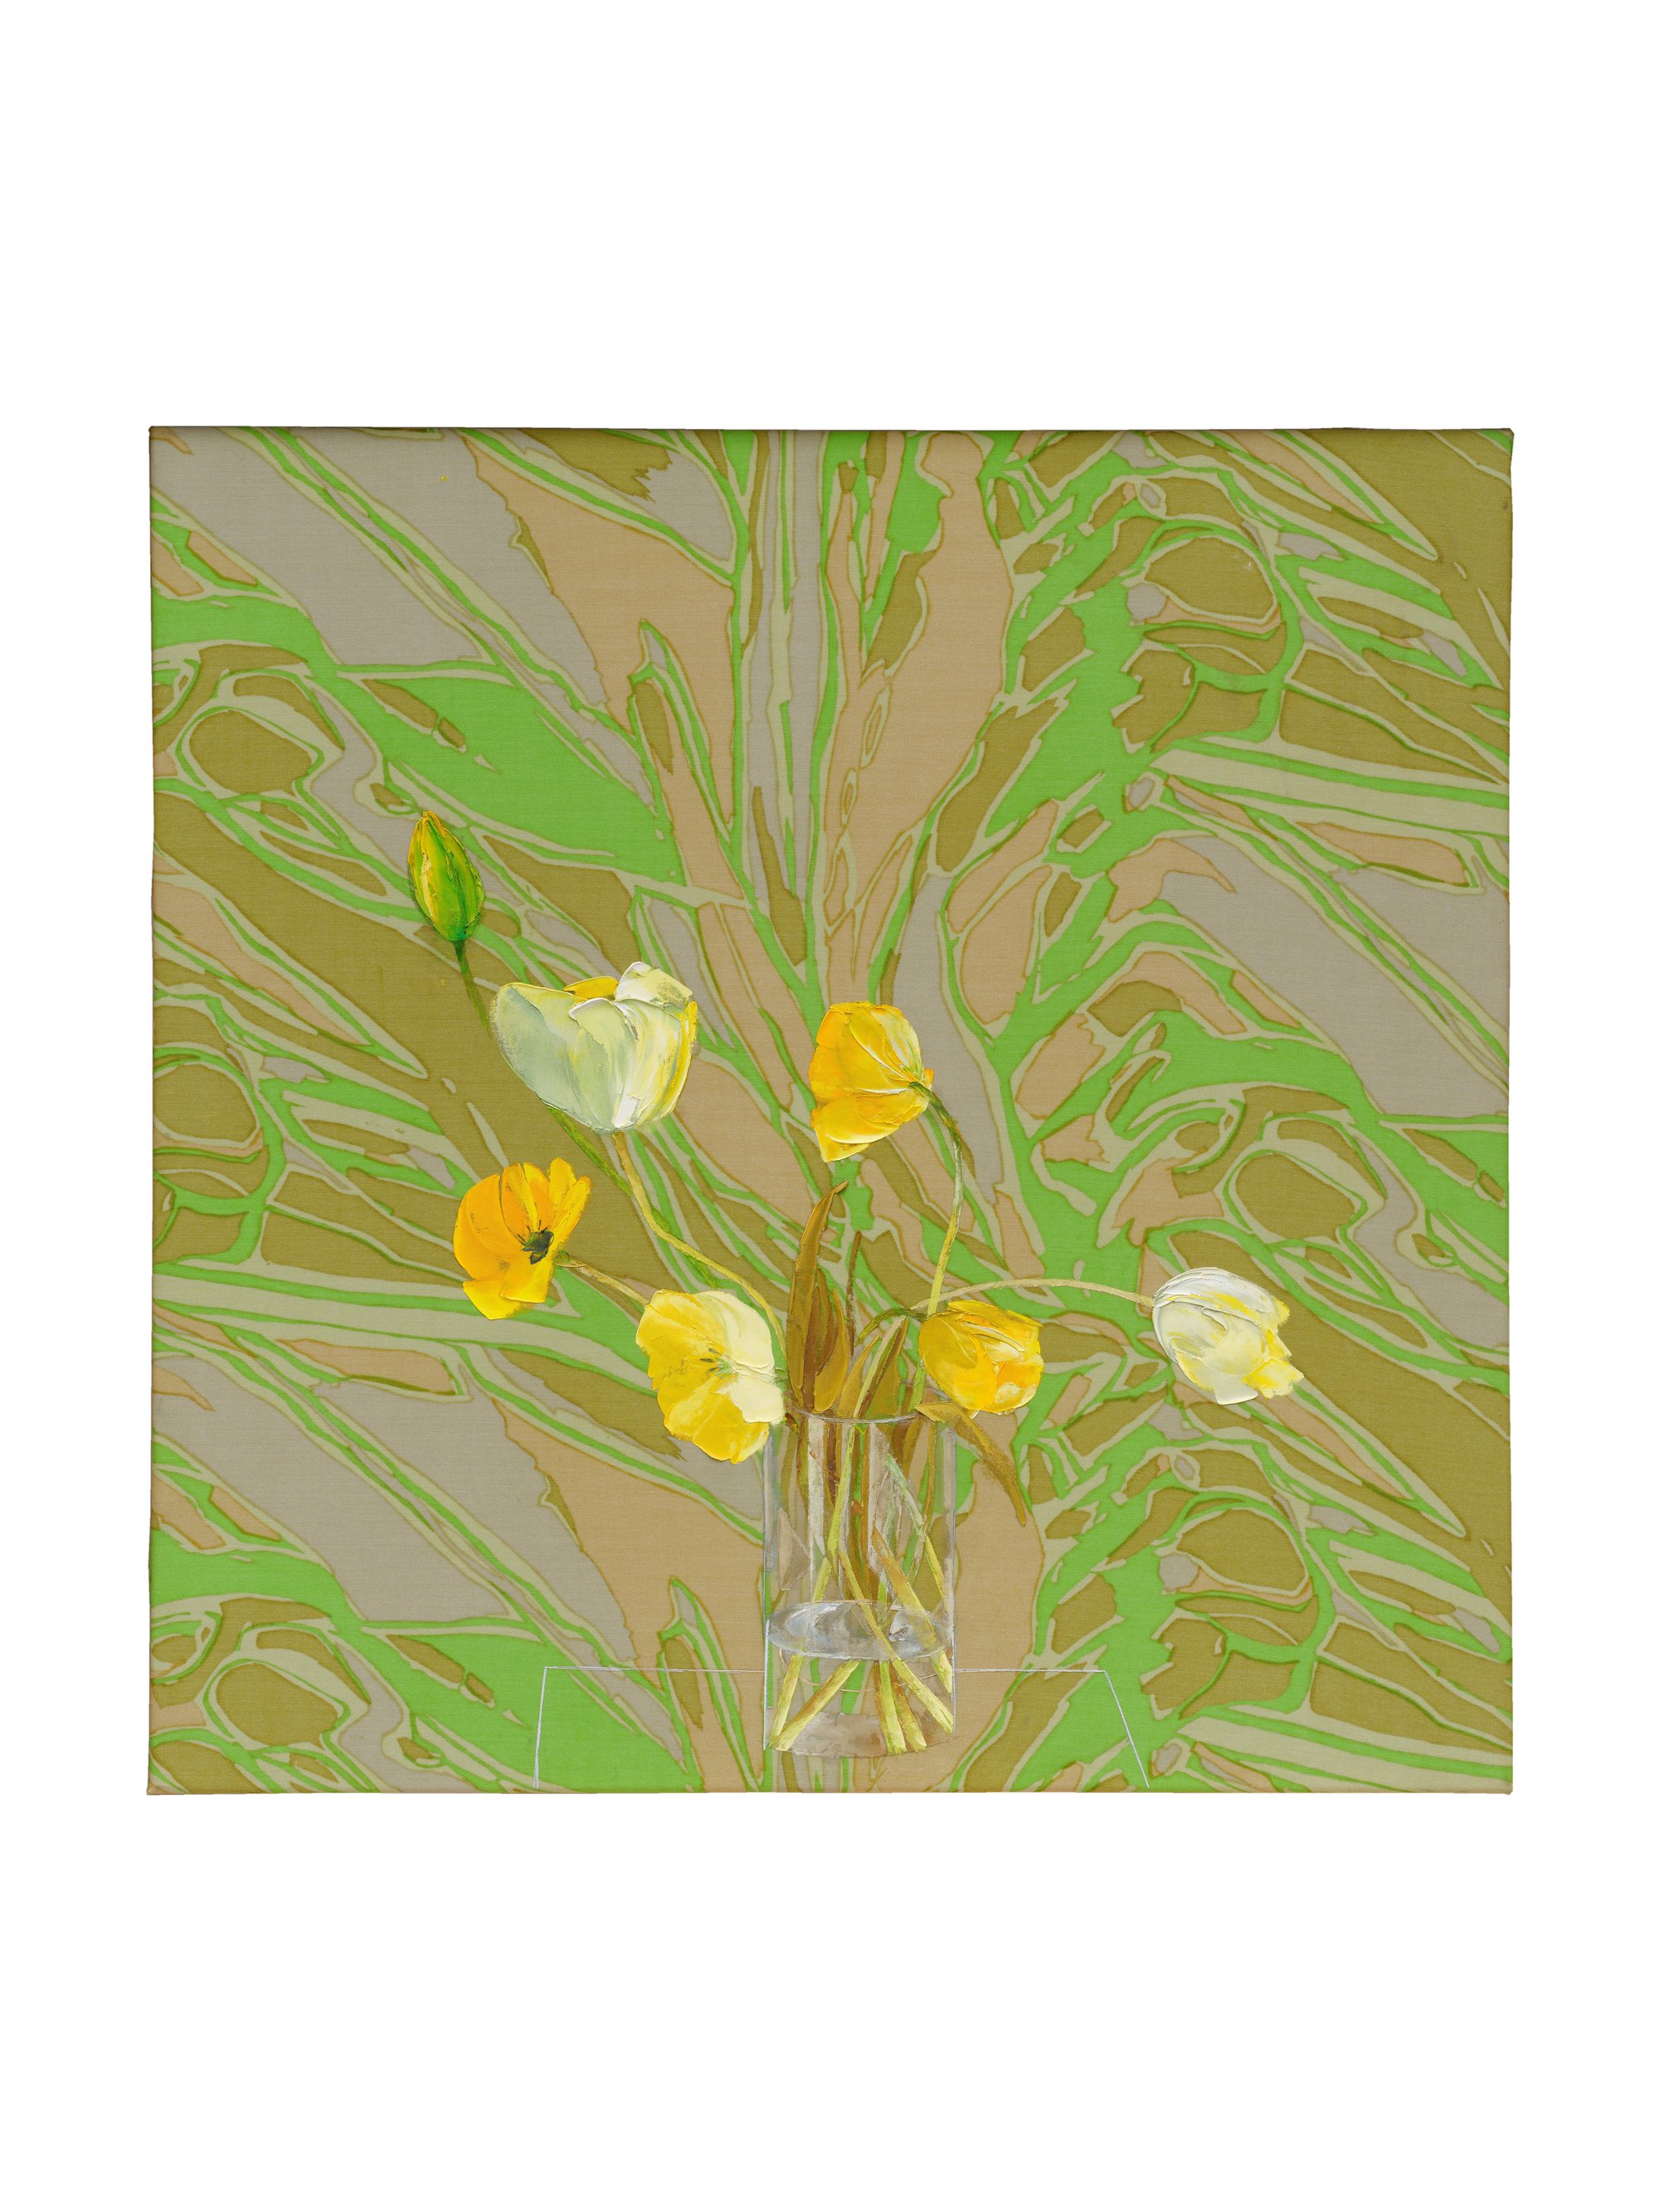 Bernat Klein, Yellow Tulips, oil on screen printed knitted jersey polyester (Diolen), 106 x 106 cm (41 3/4 x 41 3/4 in), 1998